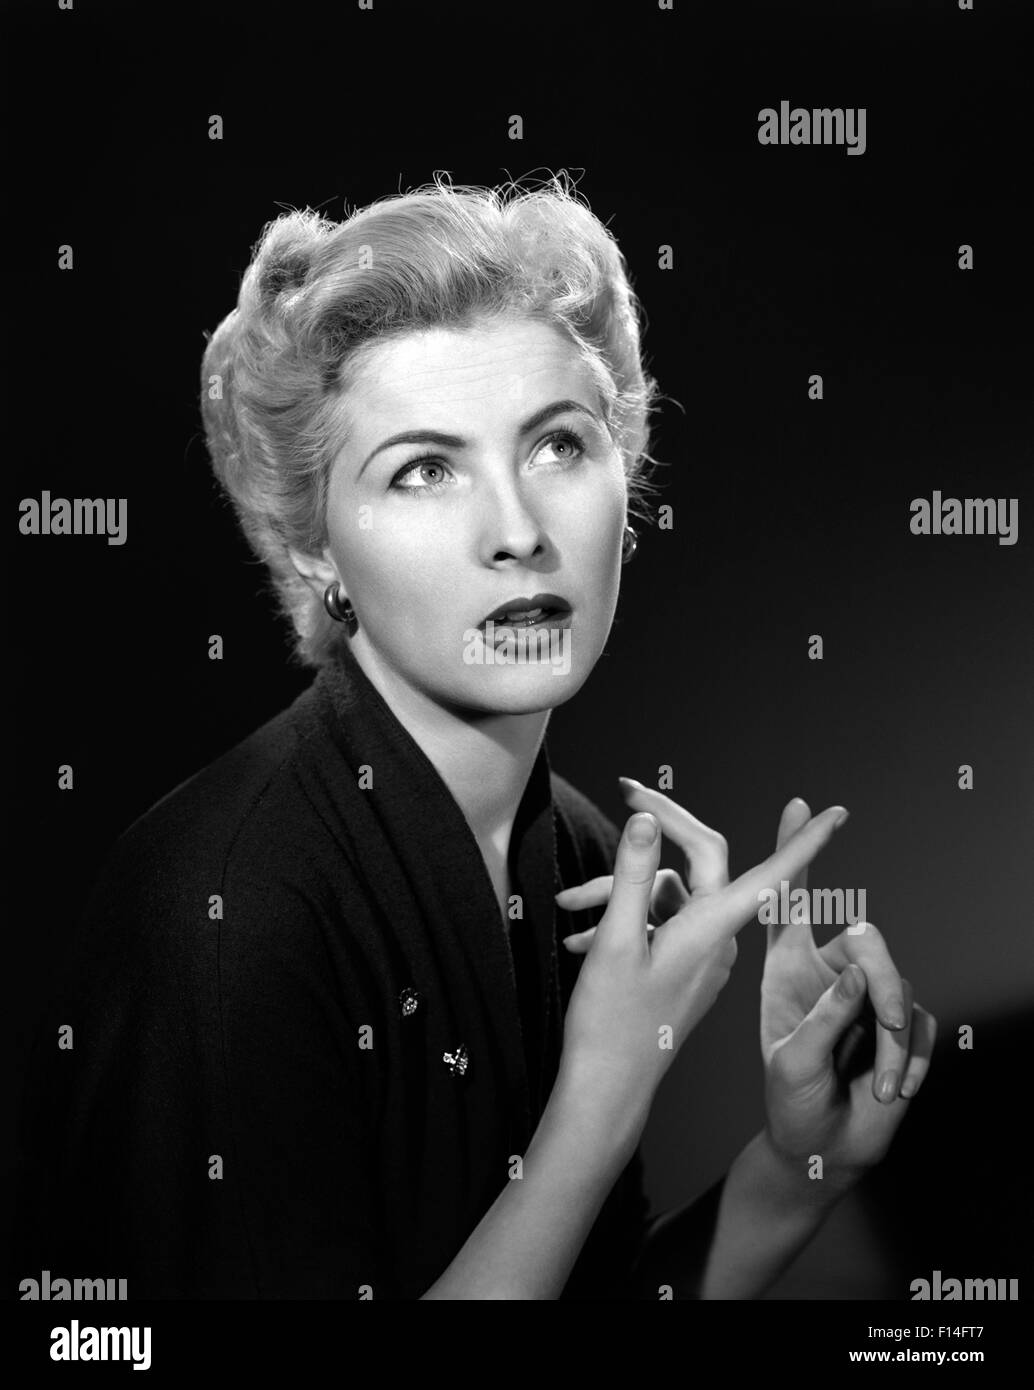 1950s THOUGHTFUL BLOND WOMAN COUNTING ON HER FINGERS LOOKING AWAY Stock Photo